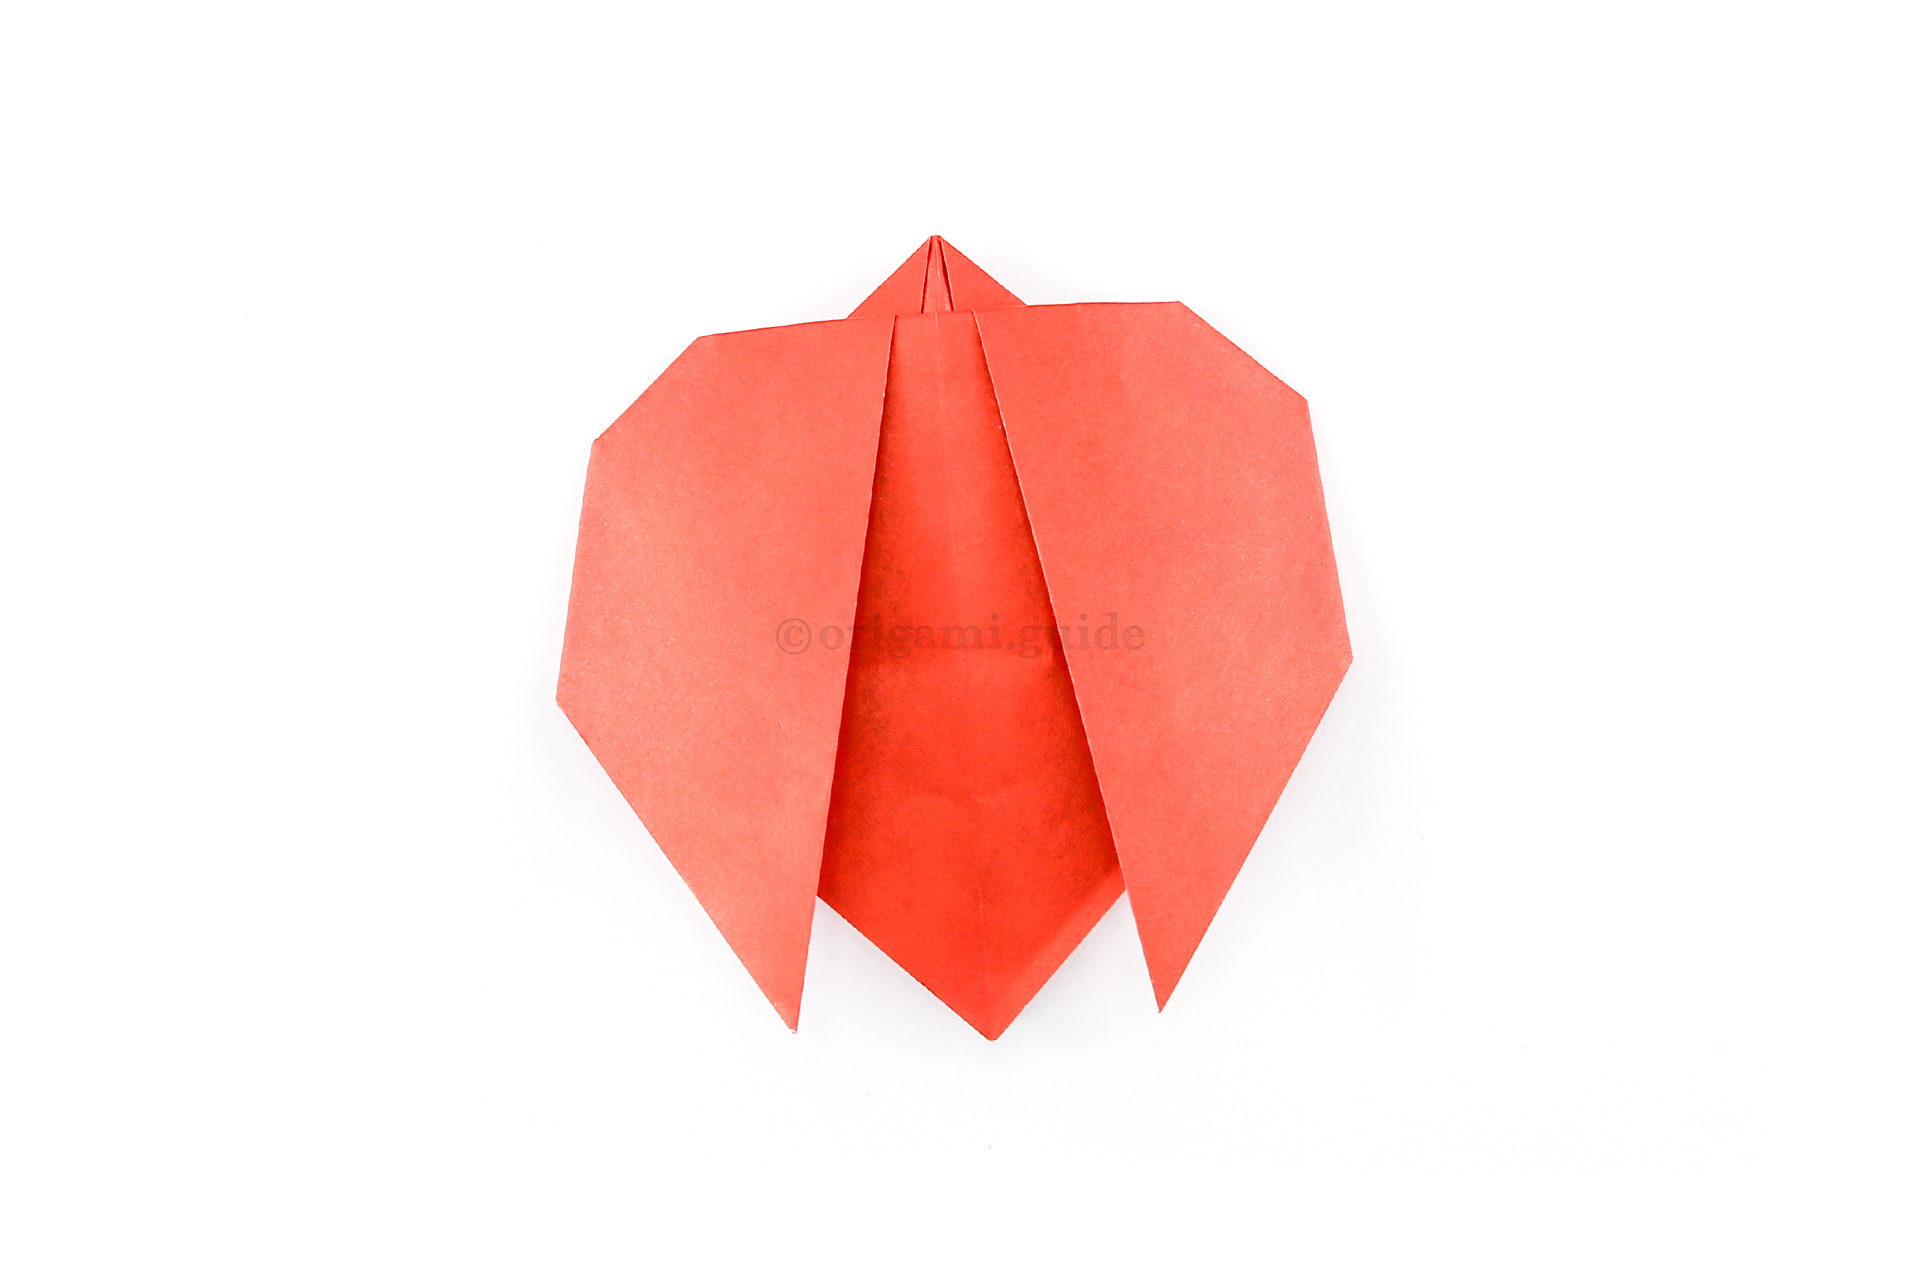 Fold the left and right points behind, making the ladybug a more rounded shape.